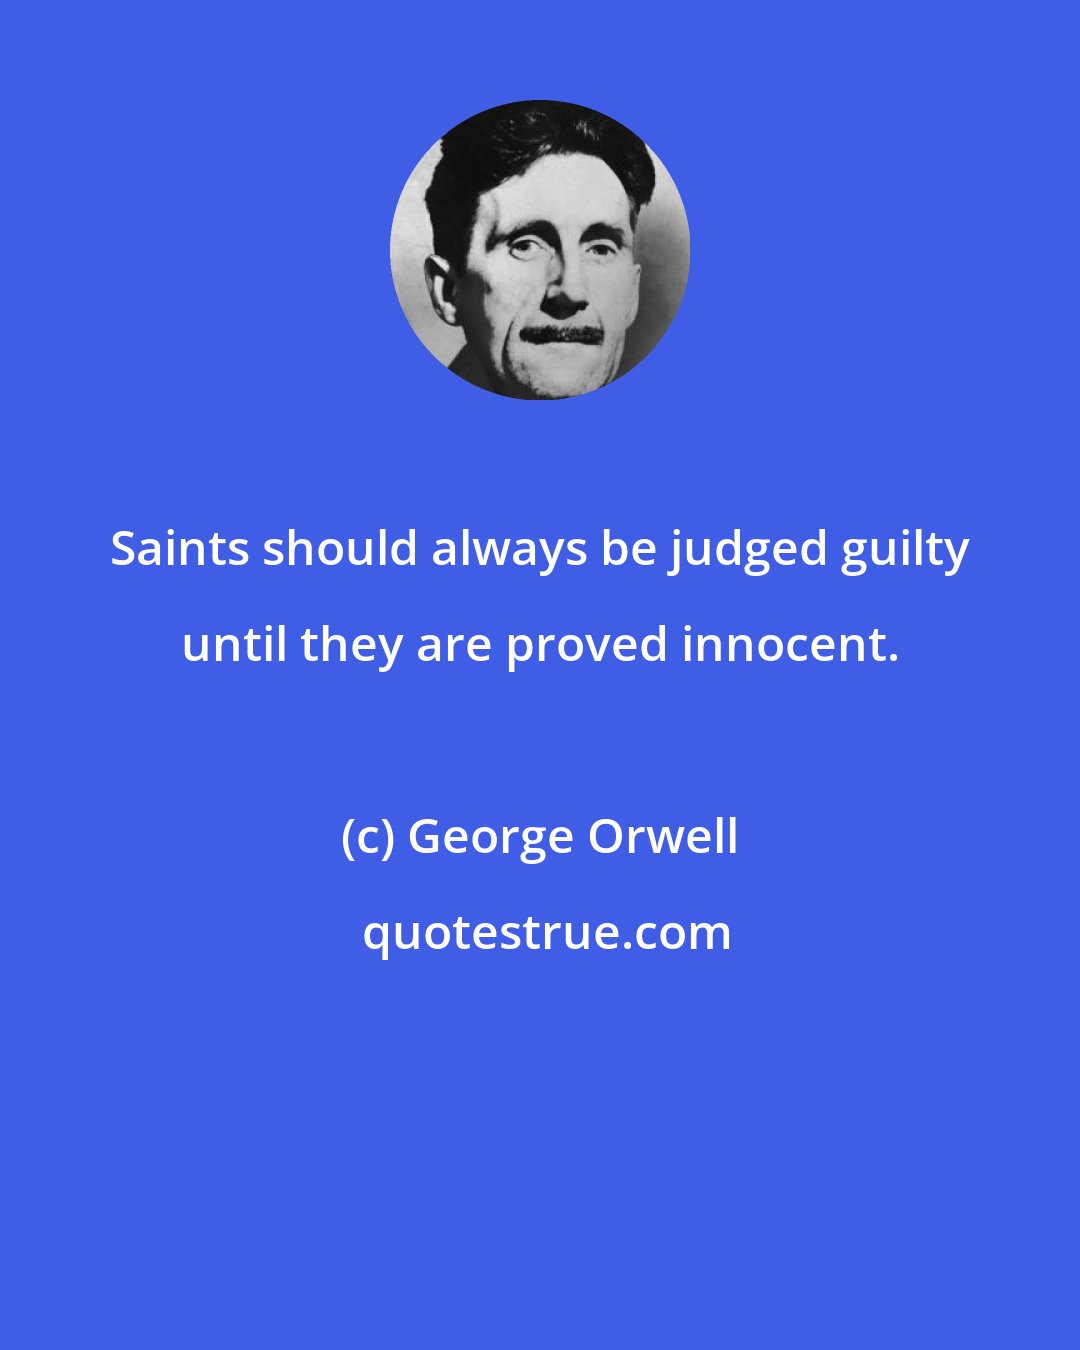 George Orwell: Saints should always be judged guilty until they are proved innocent.